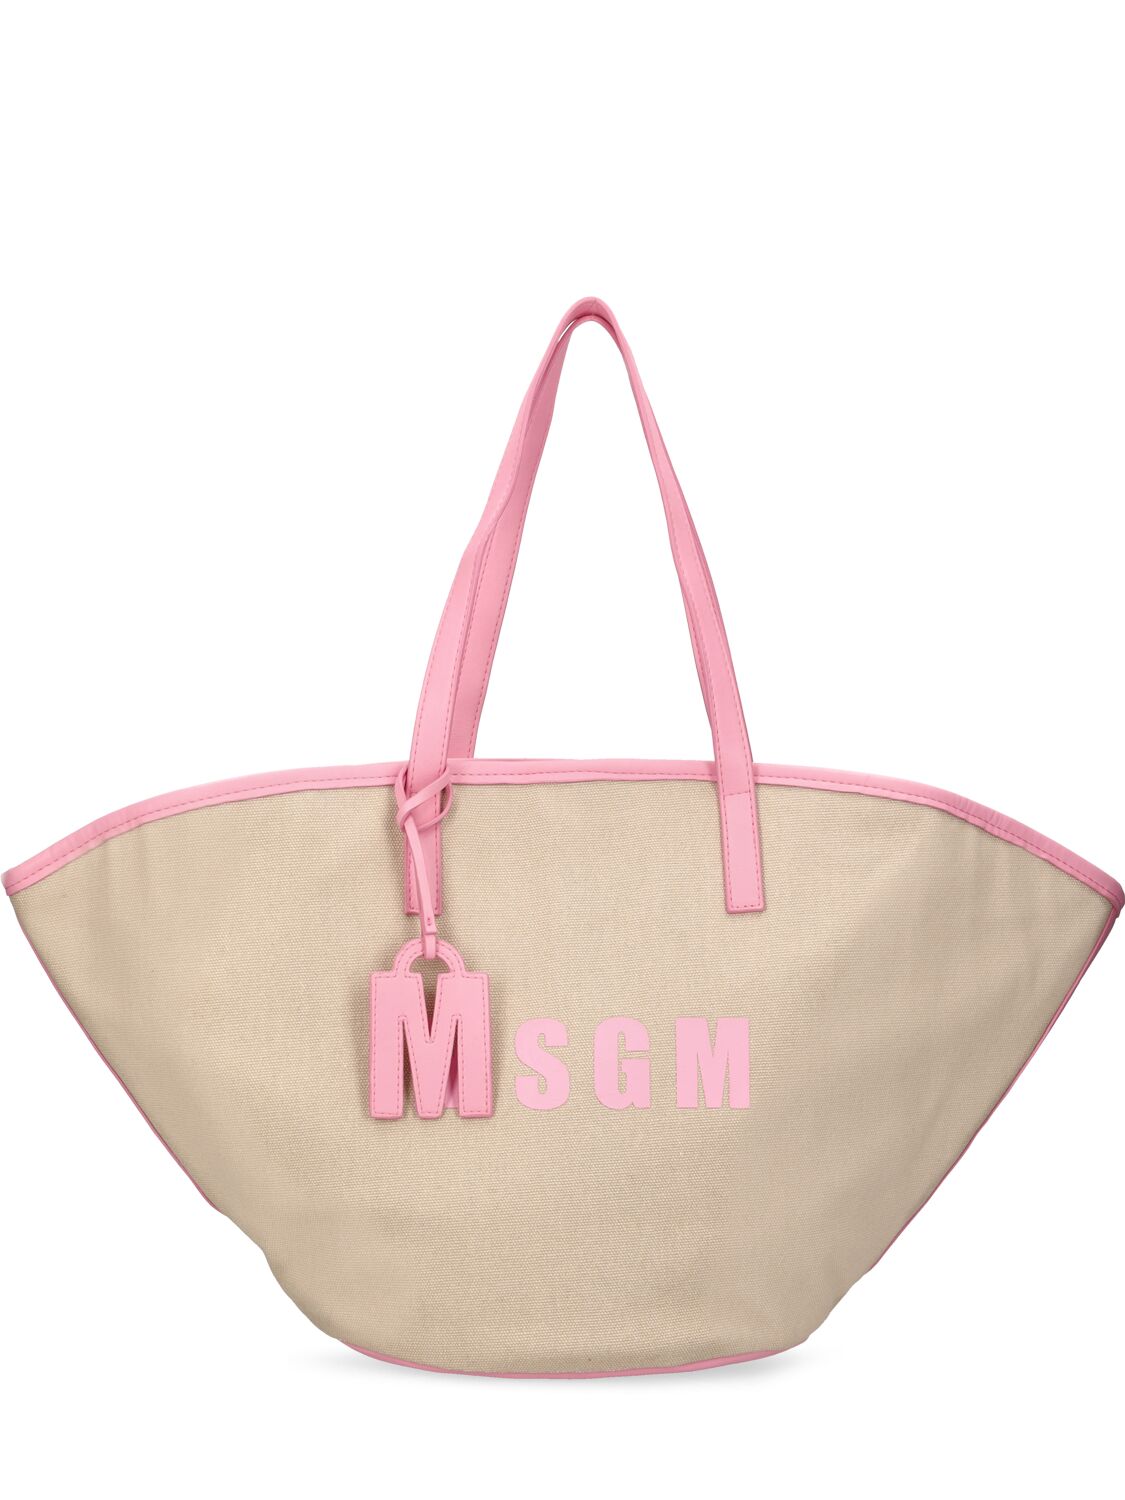 Msgm Canvas Shopping Bag In Pink